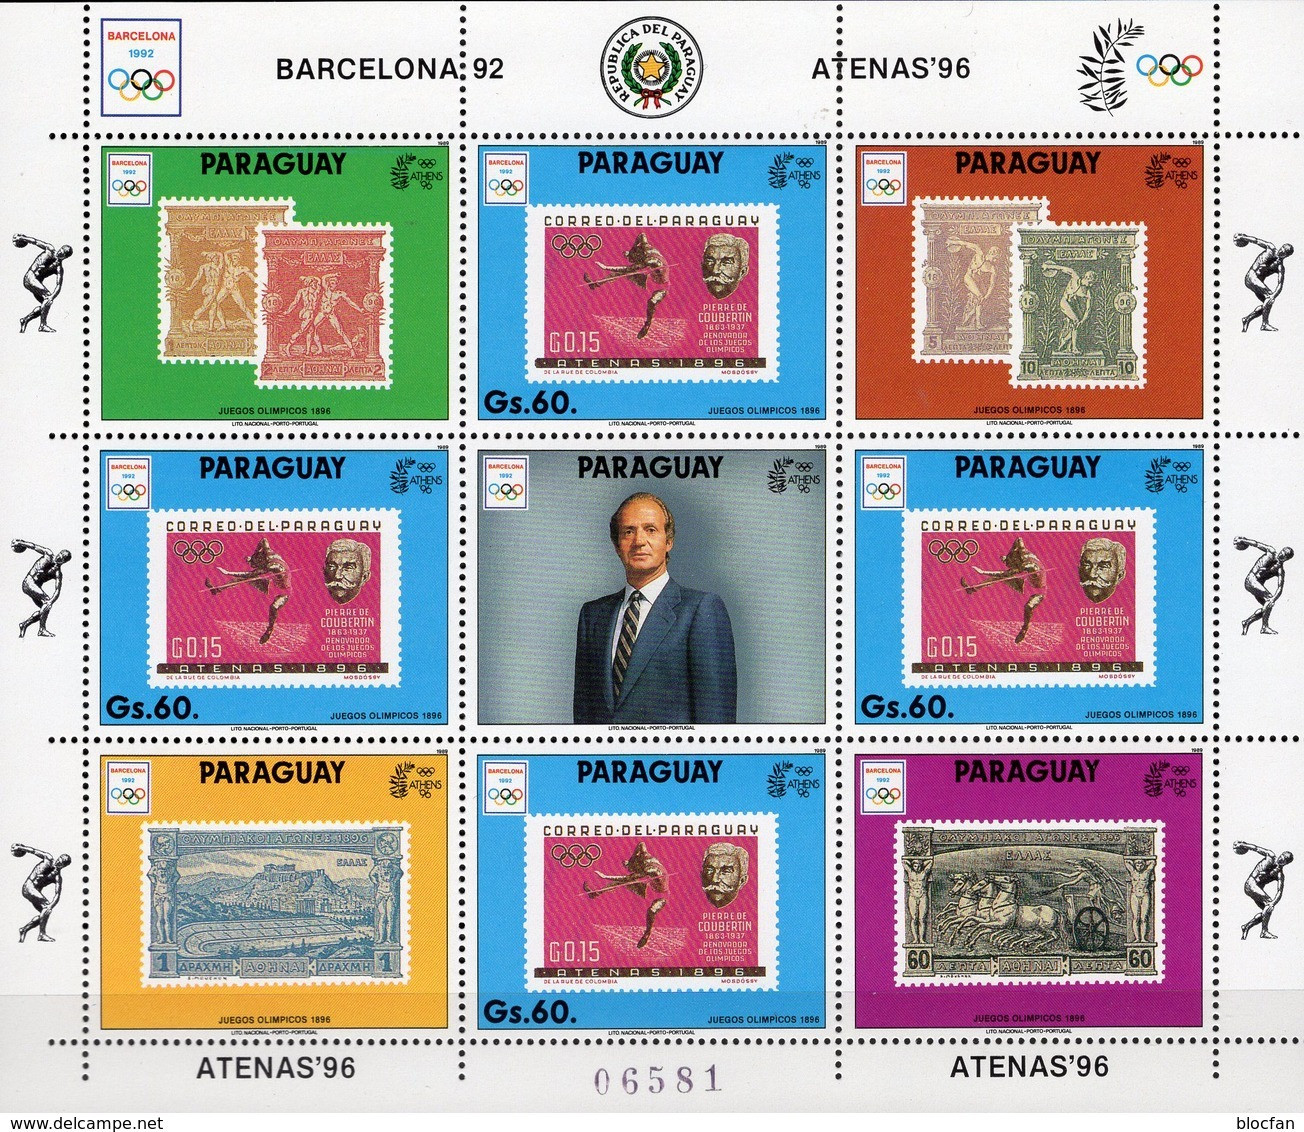 Olympia Athen 1896 Paraguay 4449 9-KB ** 36€ Barcelona 1992 Stamp On Stamps M/s Hoja Bloc Sheet Ss Sheetlet Bf Olympics - Summer 1896: Athens